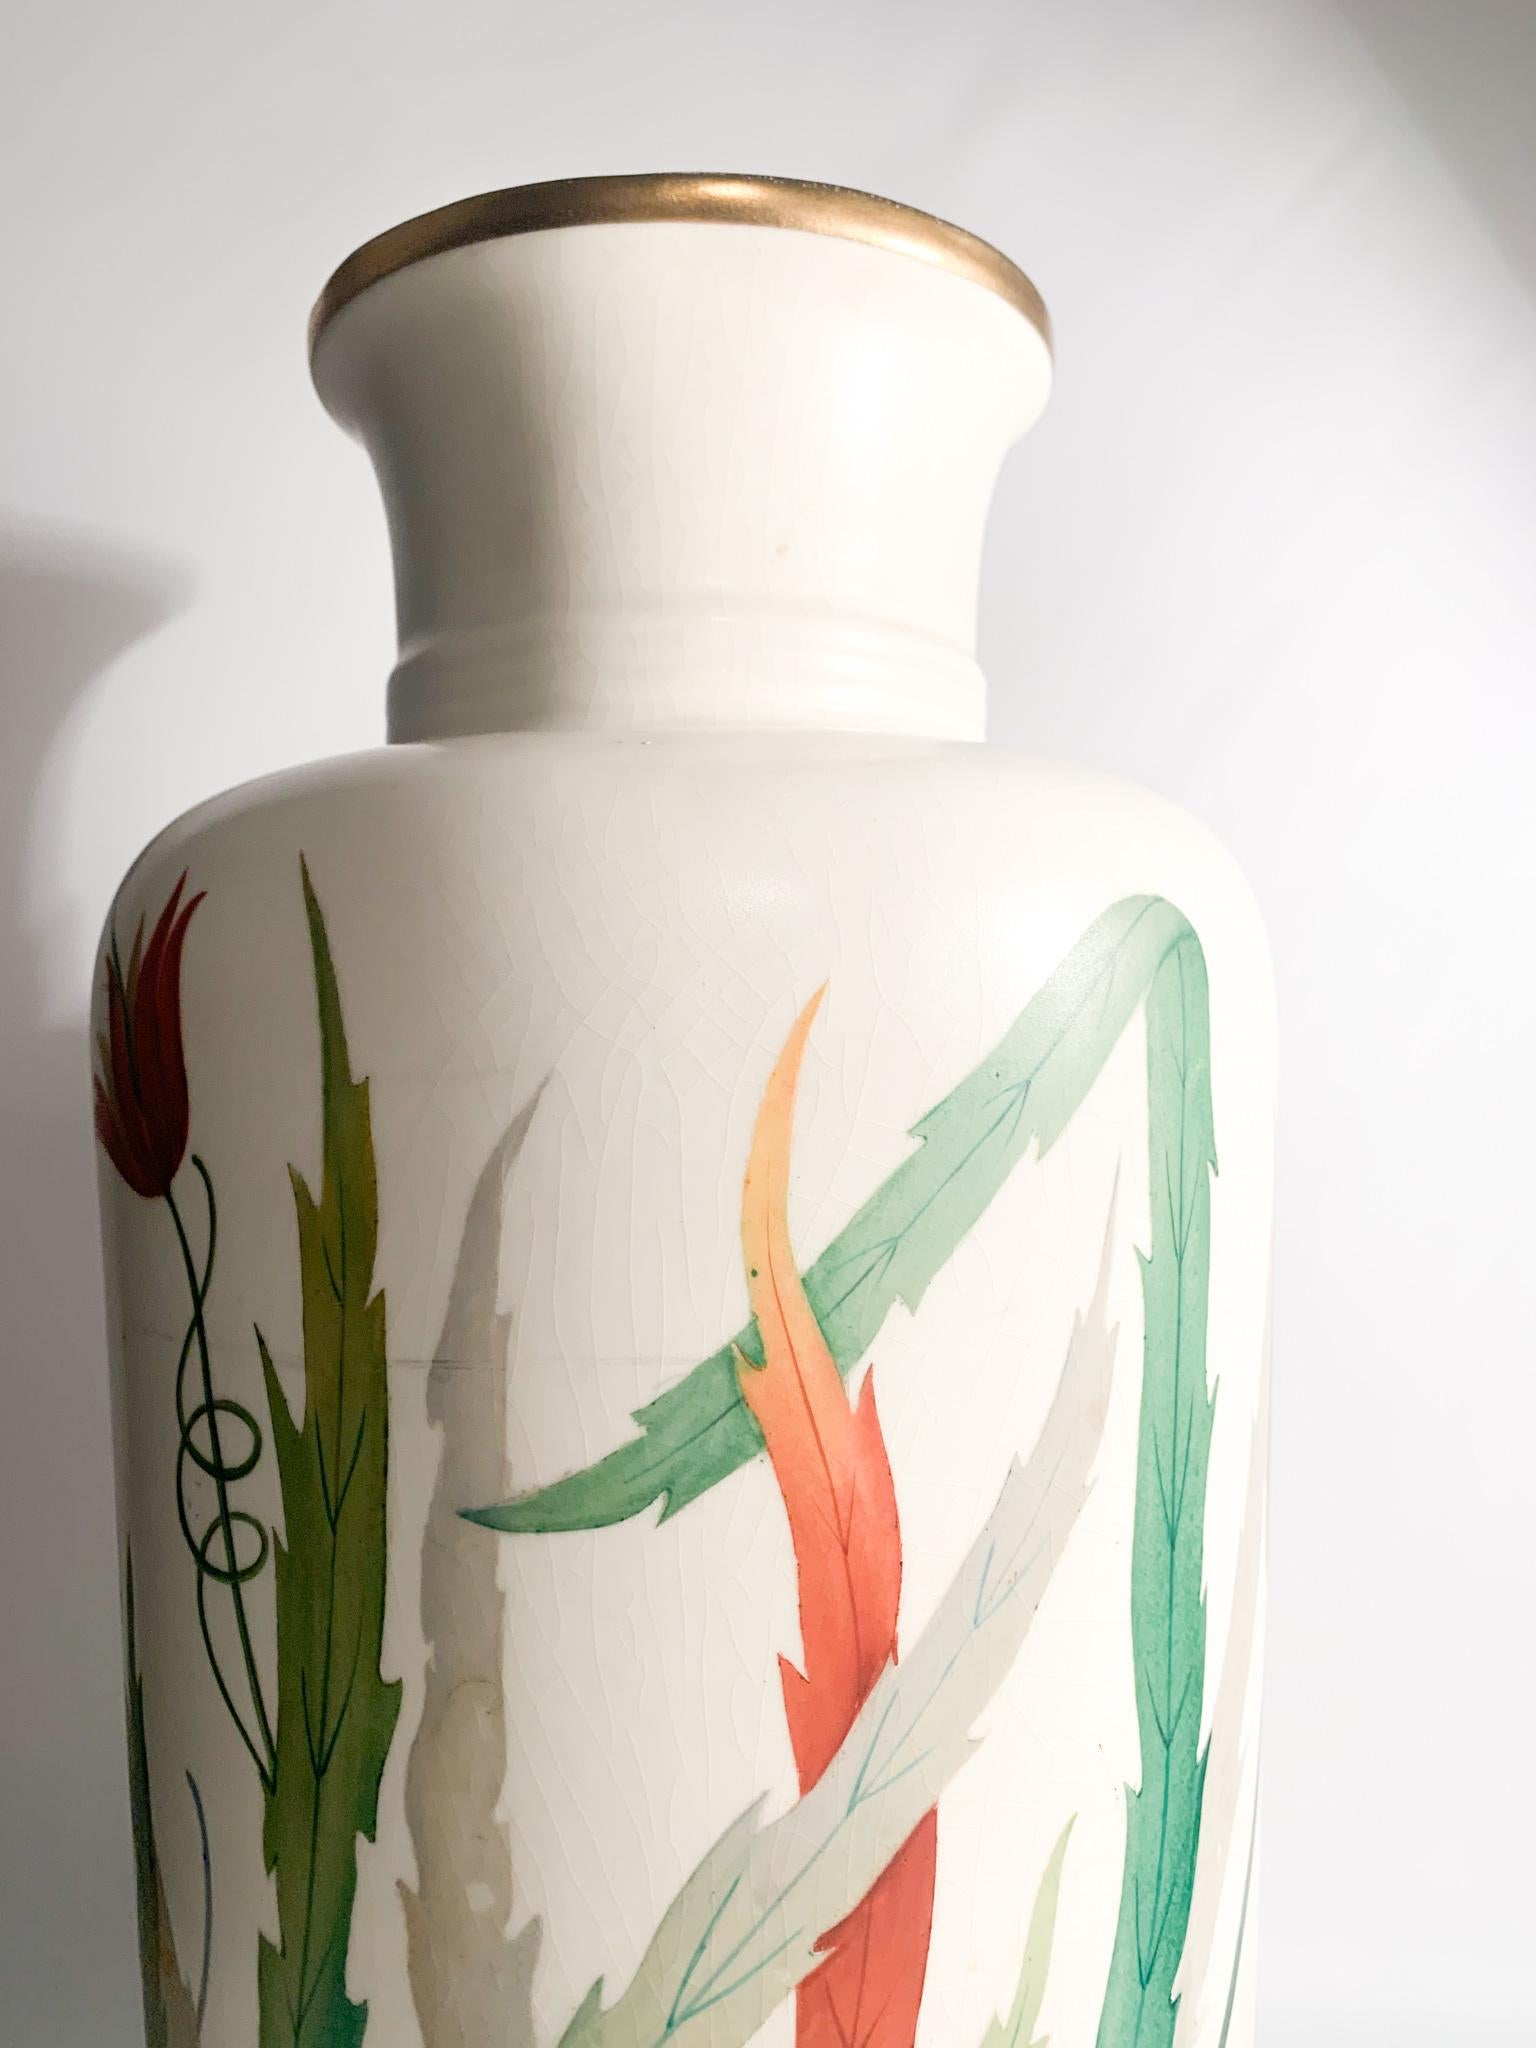 Porcelain Vase by Richard Ginori Hand Painted from the 1920s For Sale 1